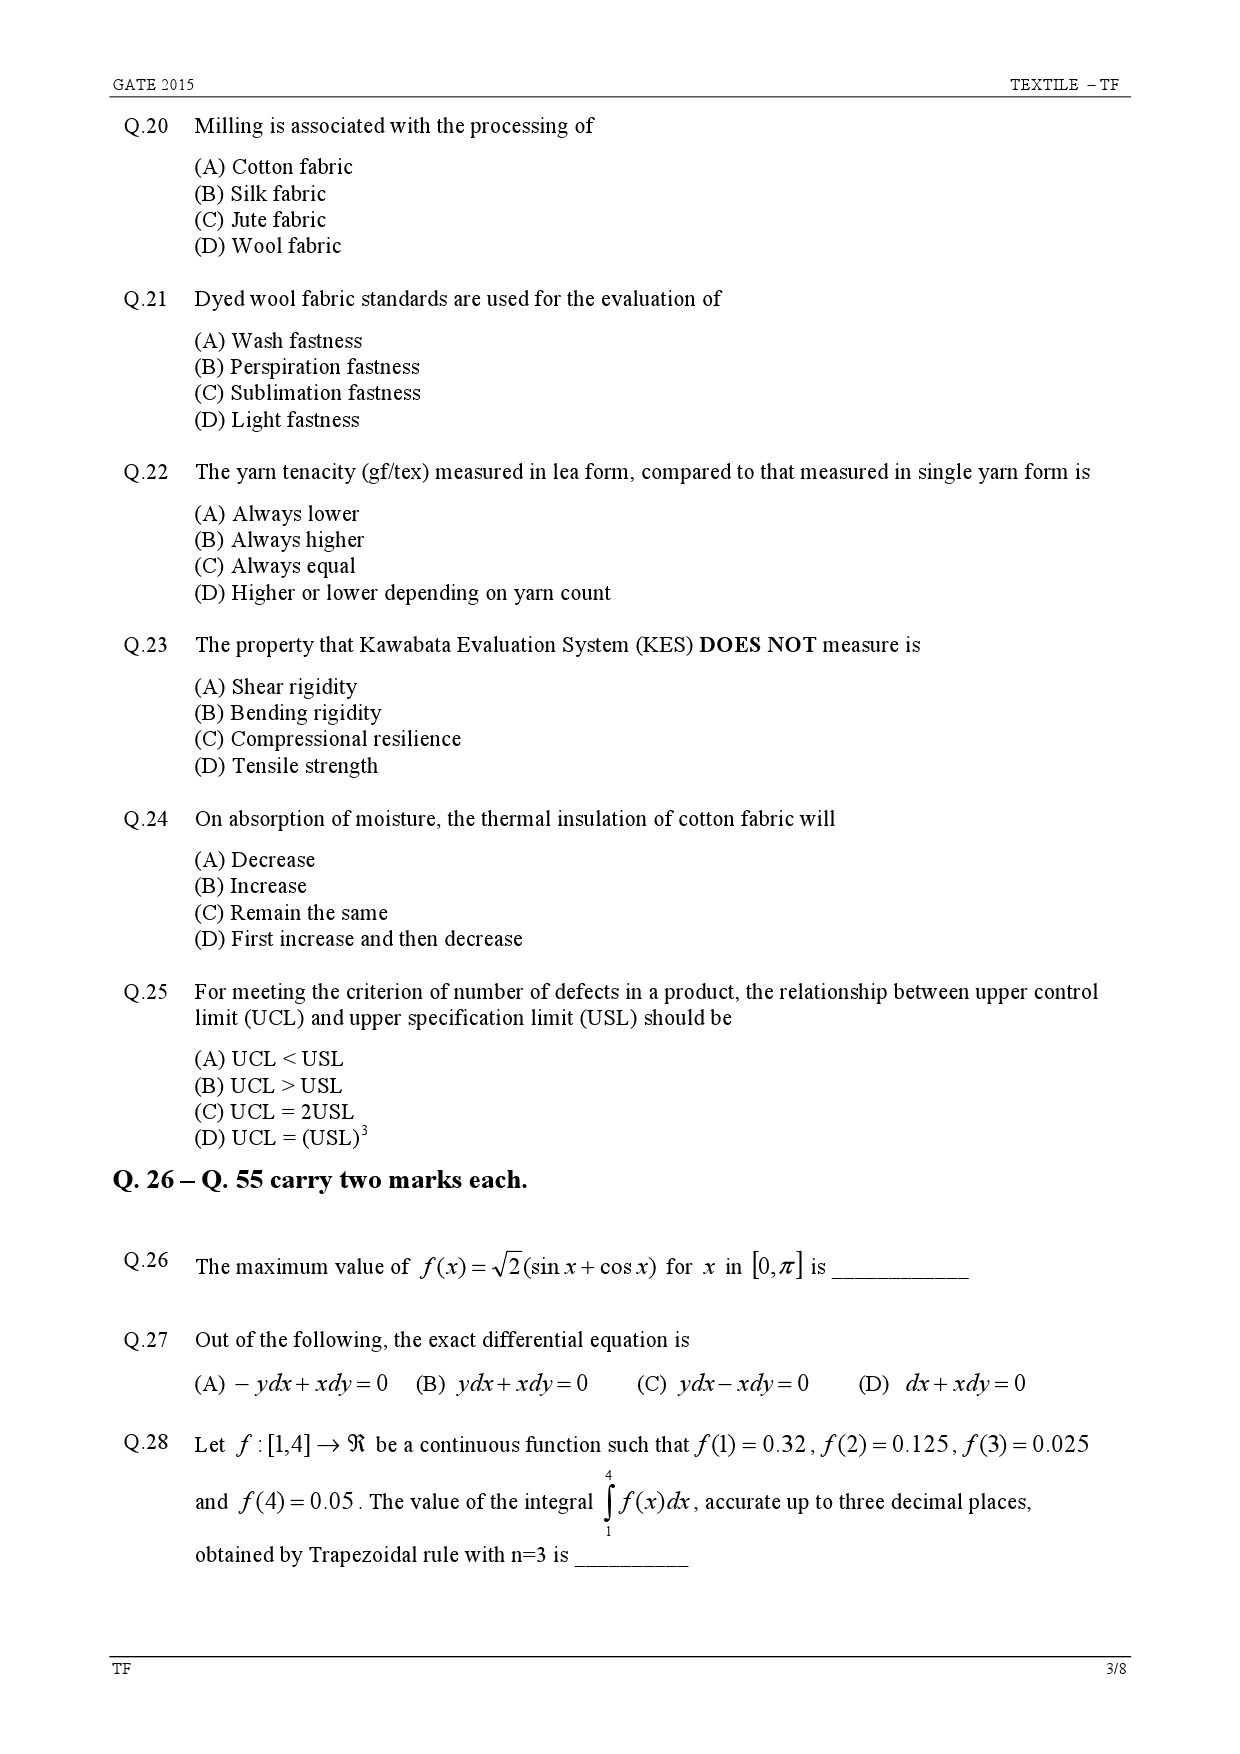 GATE Exam Question Paper 2015 Textile Engineering and Fibre Science 3